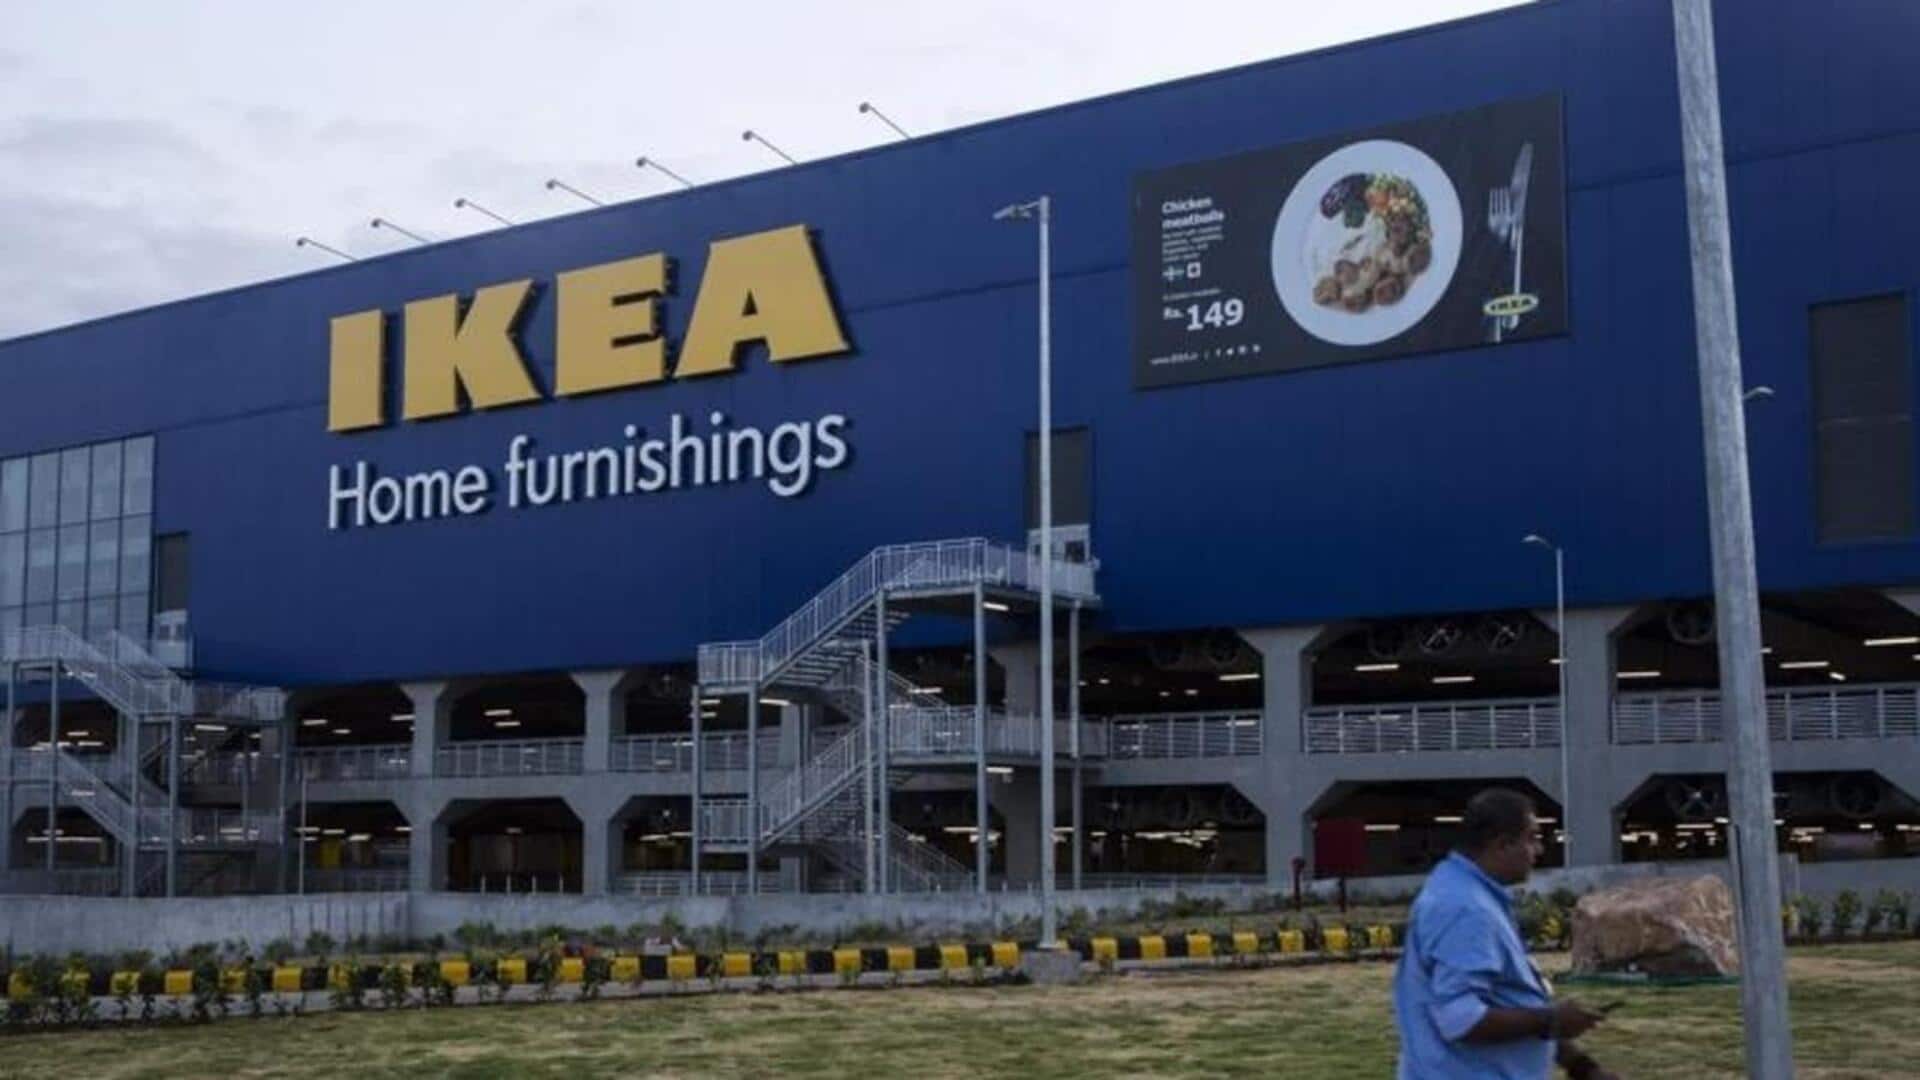 'Stores in major Indian cities': IKEA CEO outlines expansion strategy